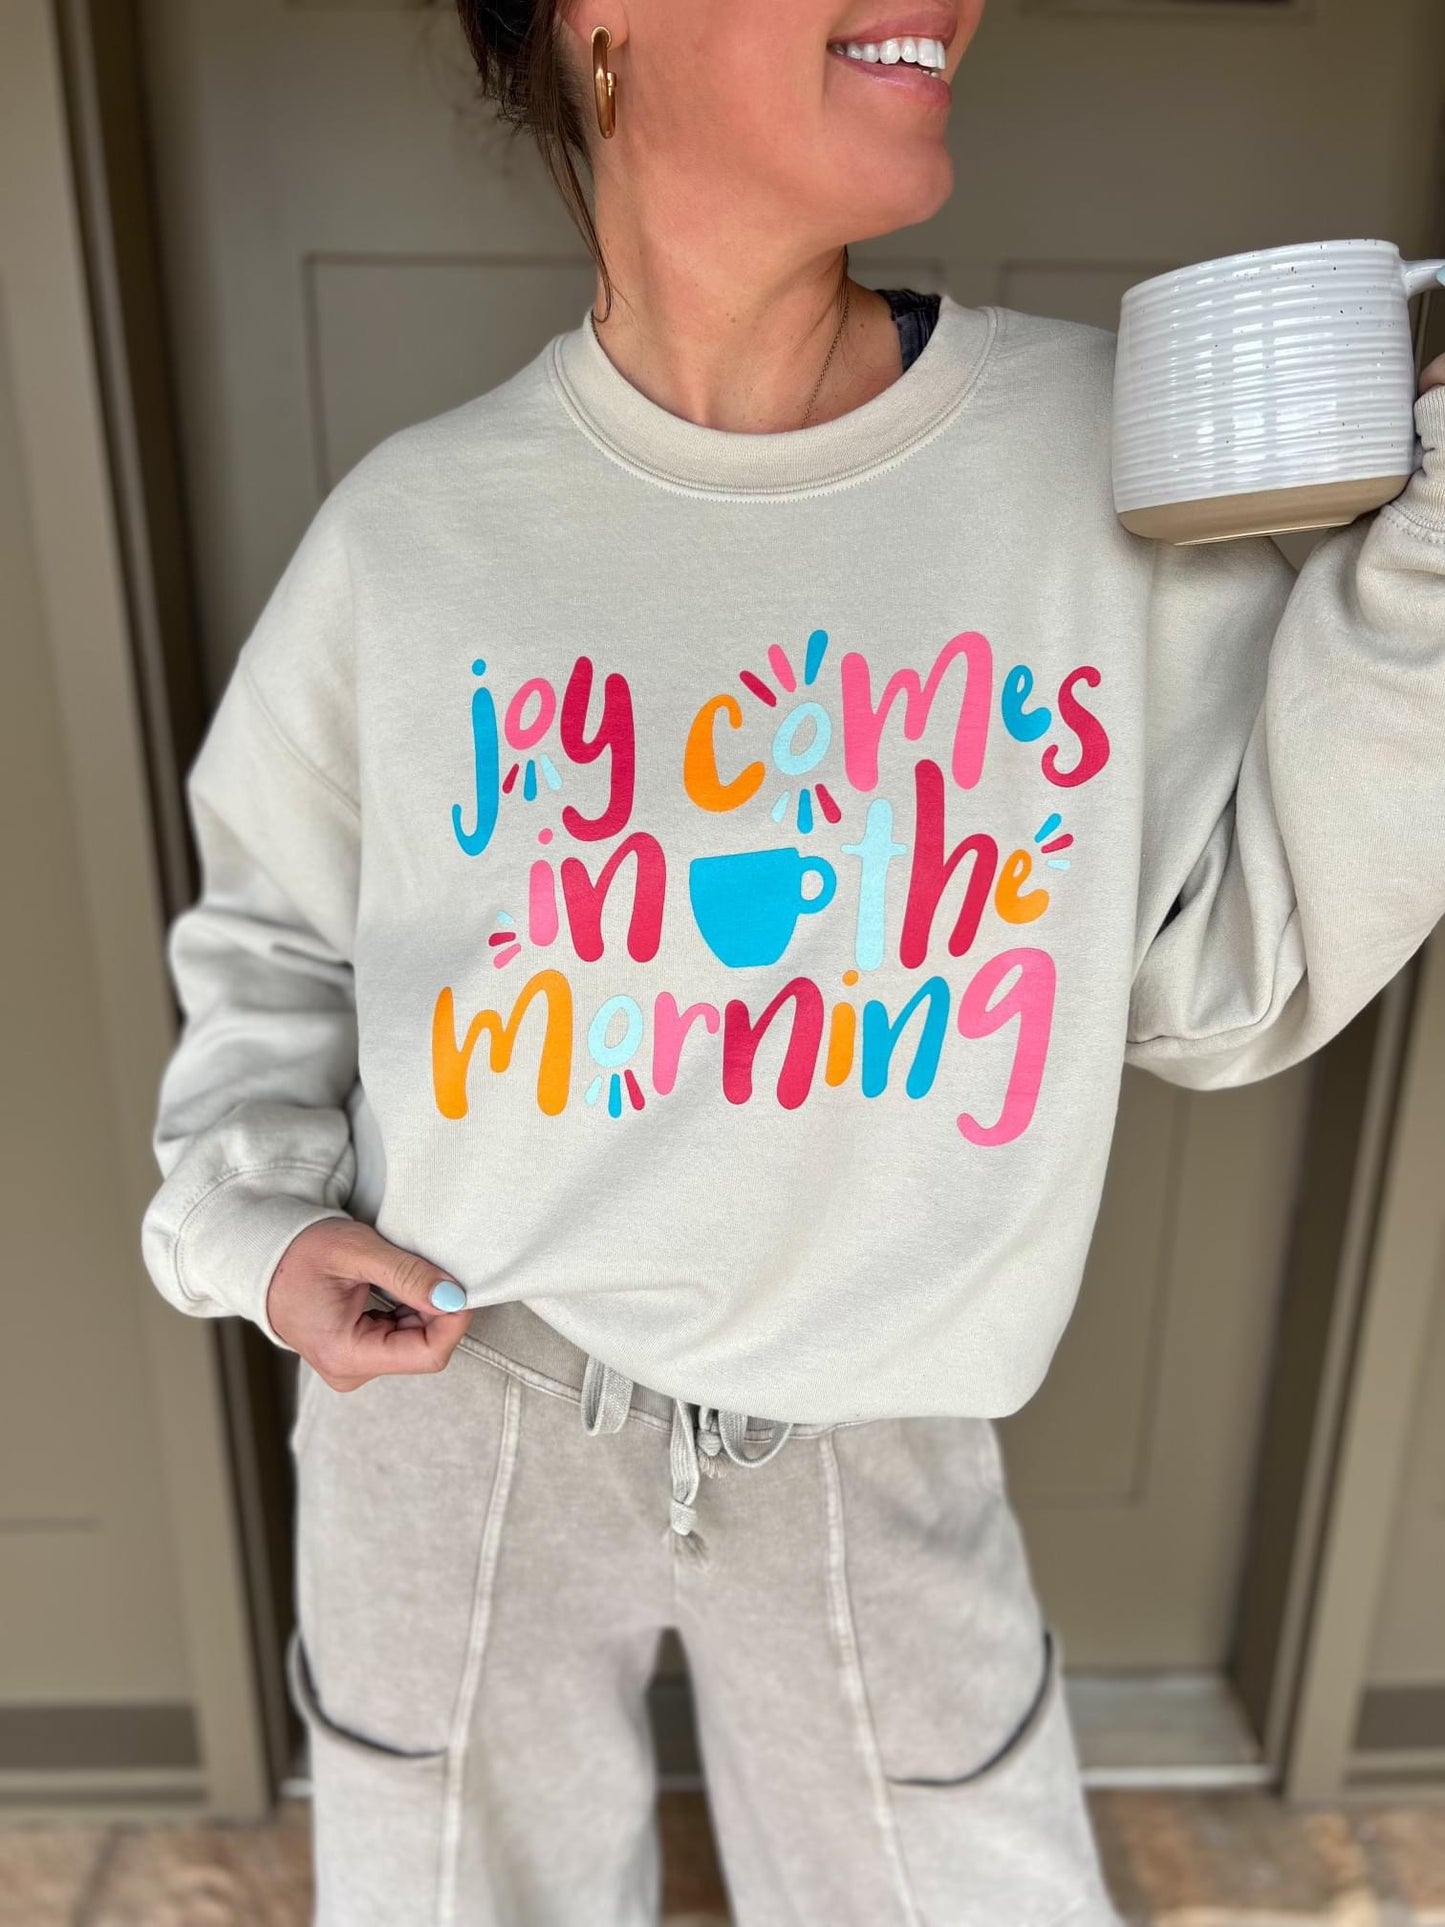 The Joy Comes in the Morning Sweatshirt